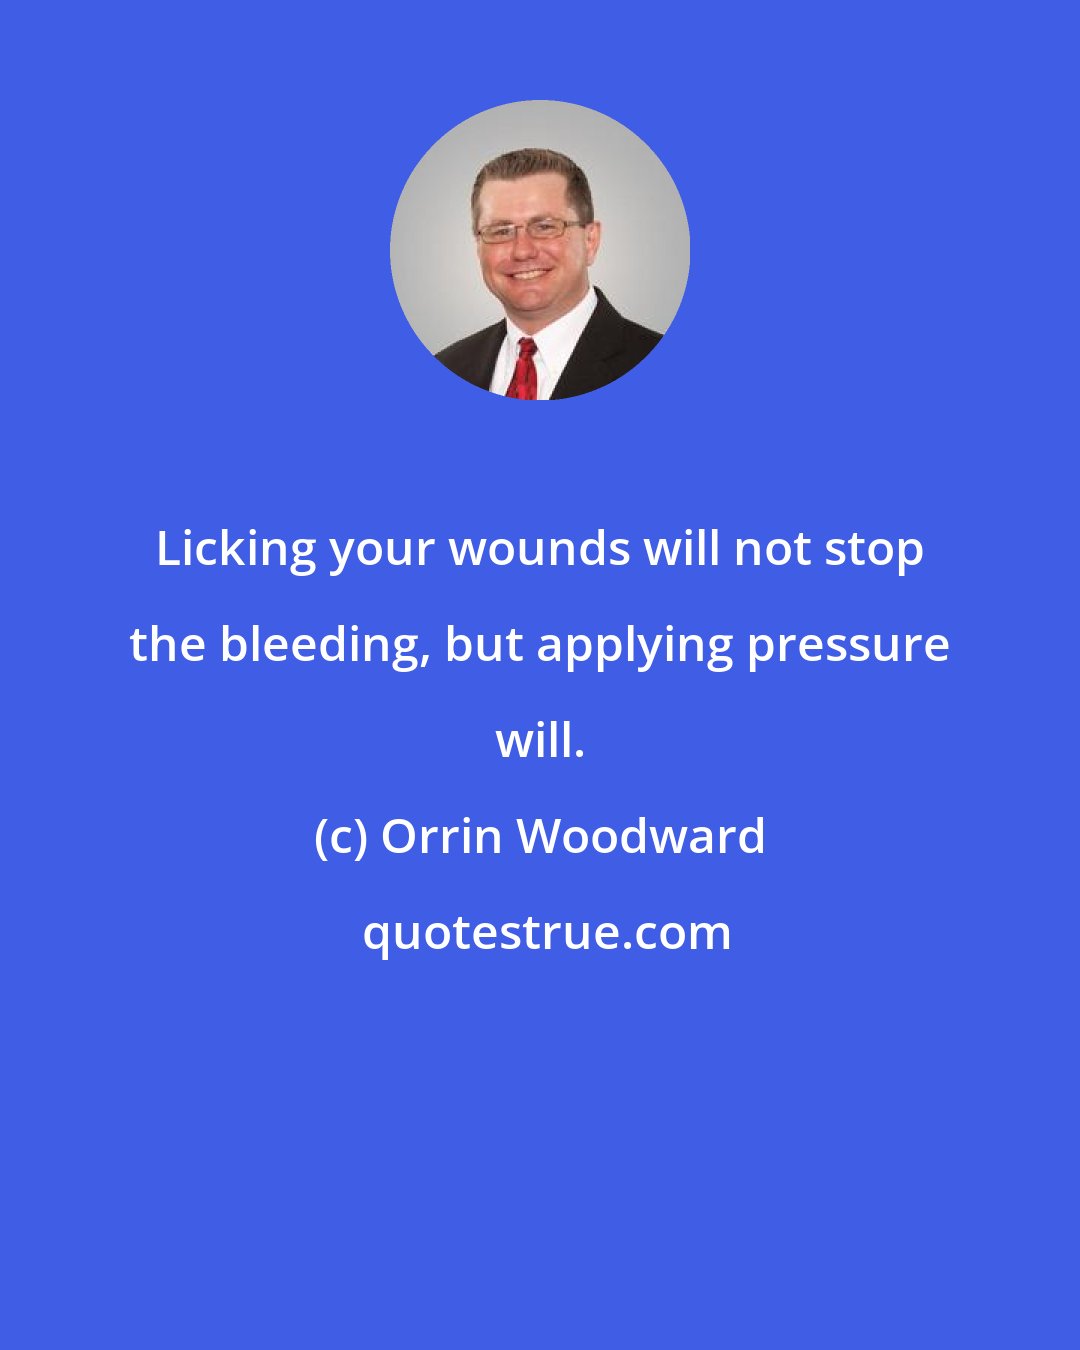 Orrin Woodward: Licking your wounds will not stop the bleeding, but applying pressure will.